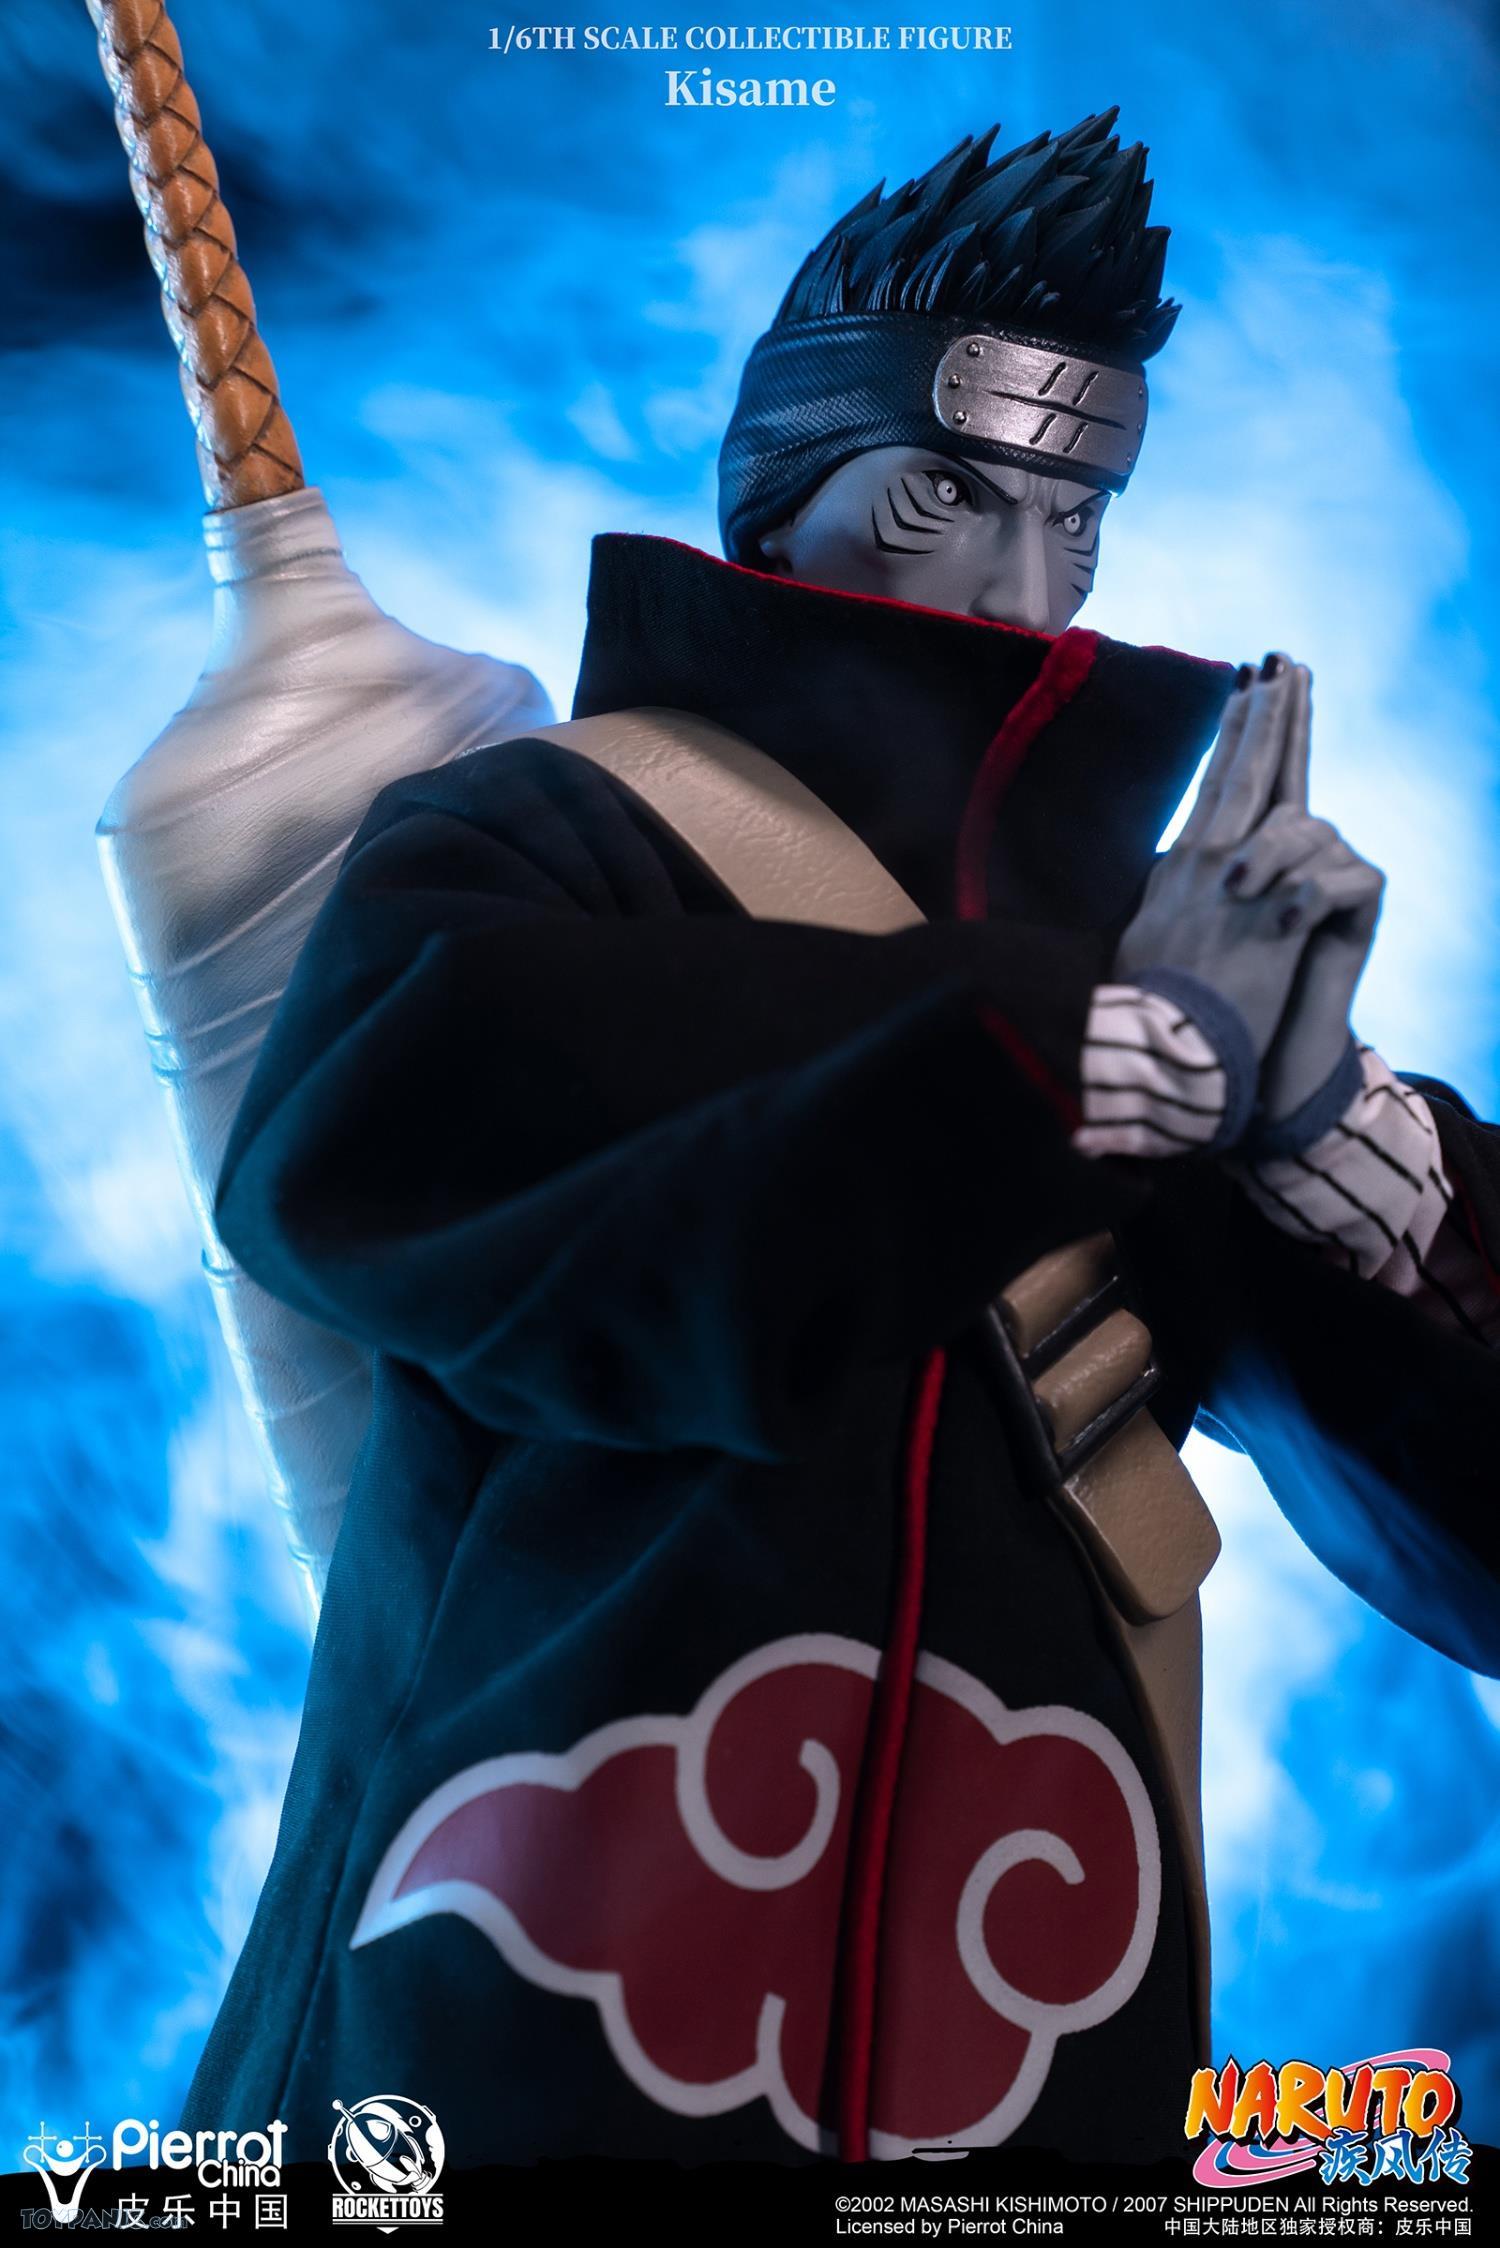 fantasy - NEW PRODUCT: Rocket Toys ROC-007 1/6 Scale Kisame 221202460438PM_9720868